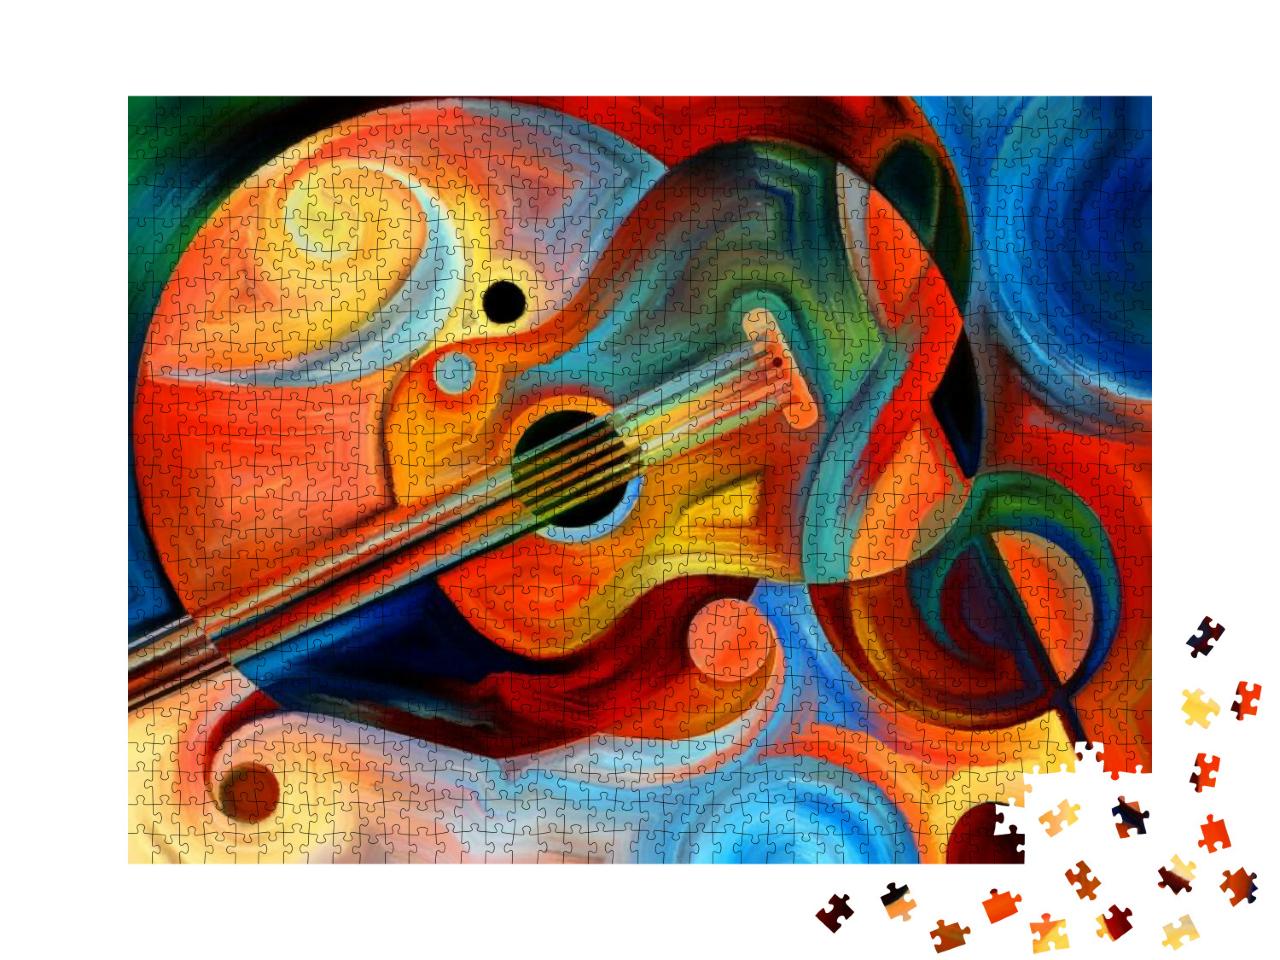 Abstract Painting on the Subject of Music & Rhythm... Jigsaw Puzzle with 1000 pieces